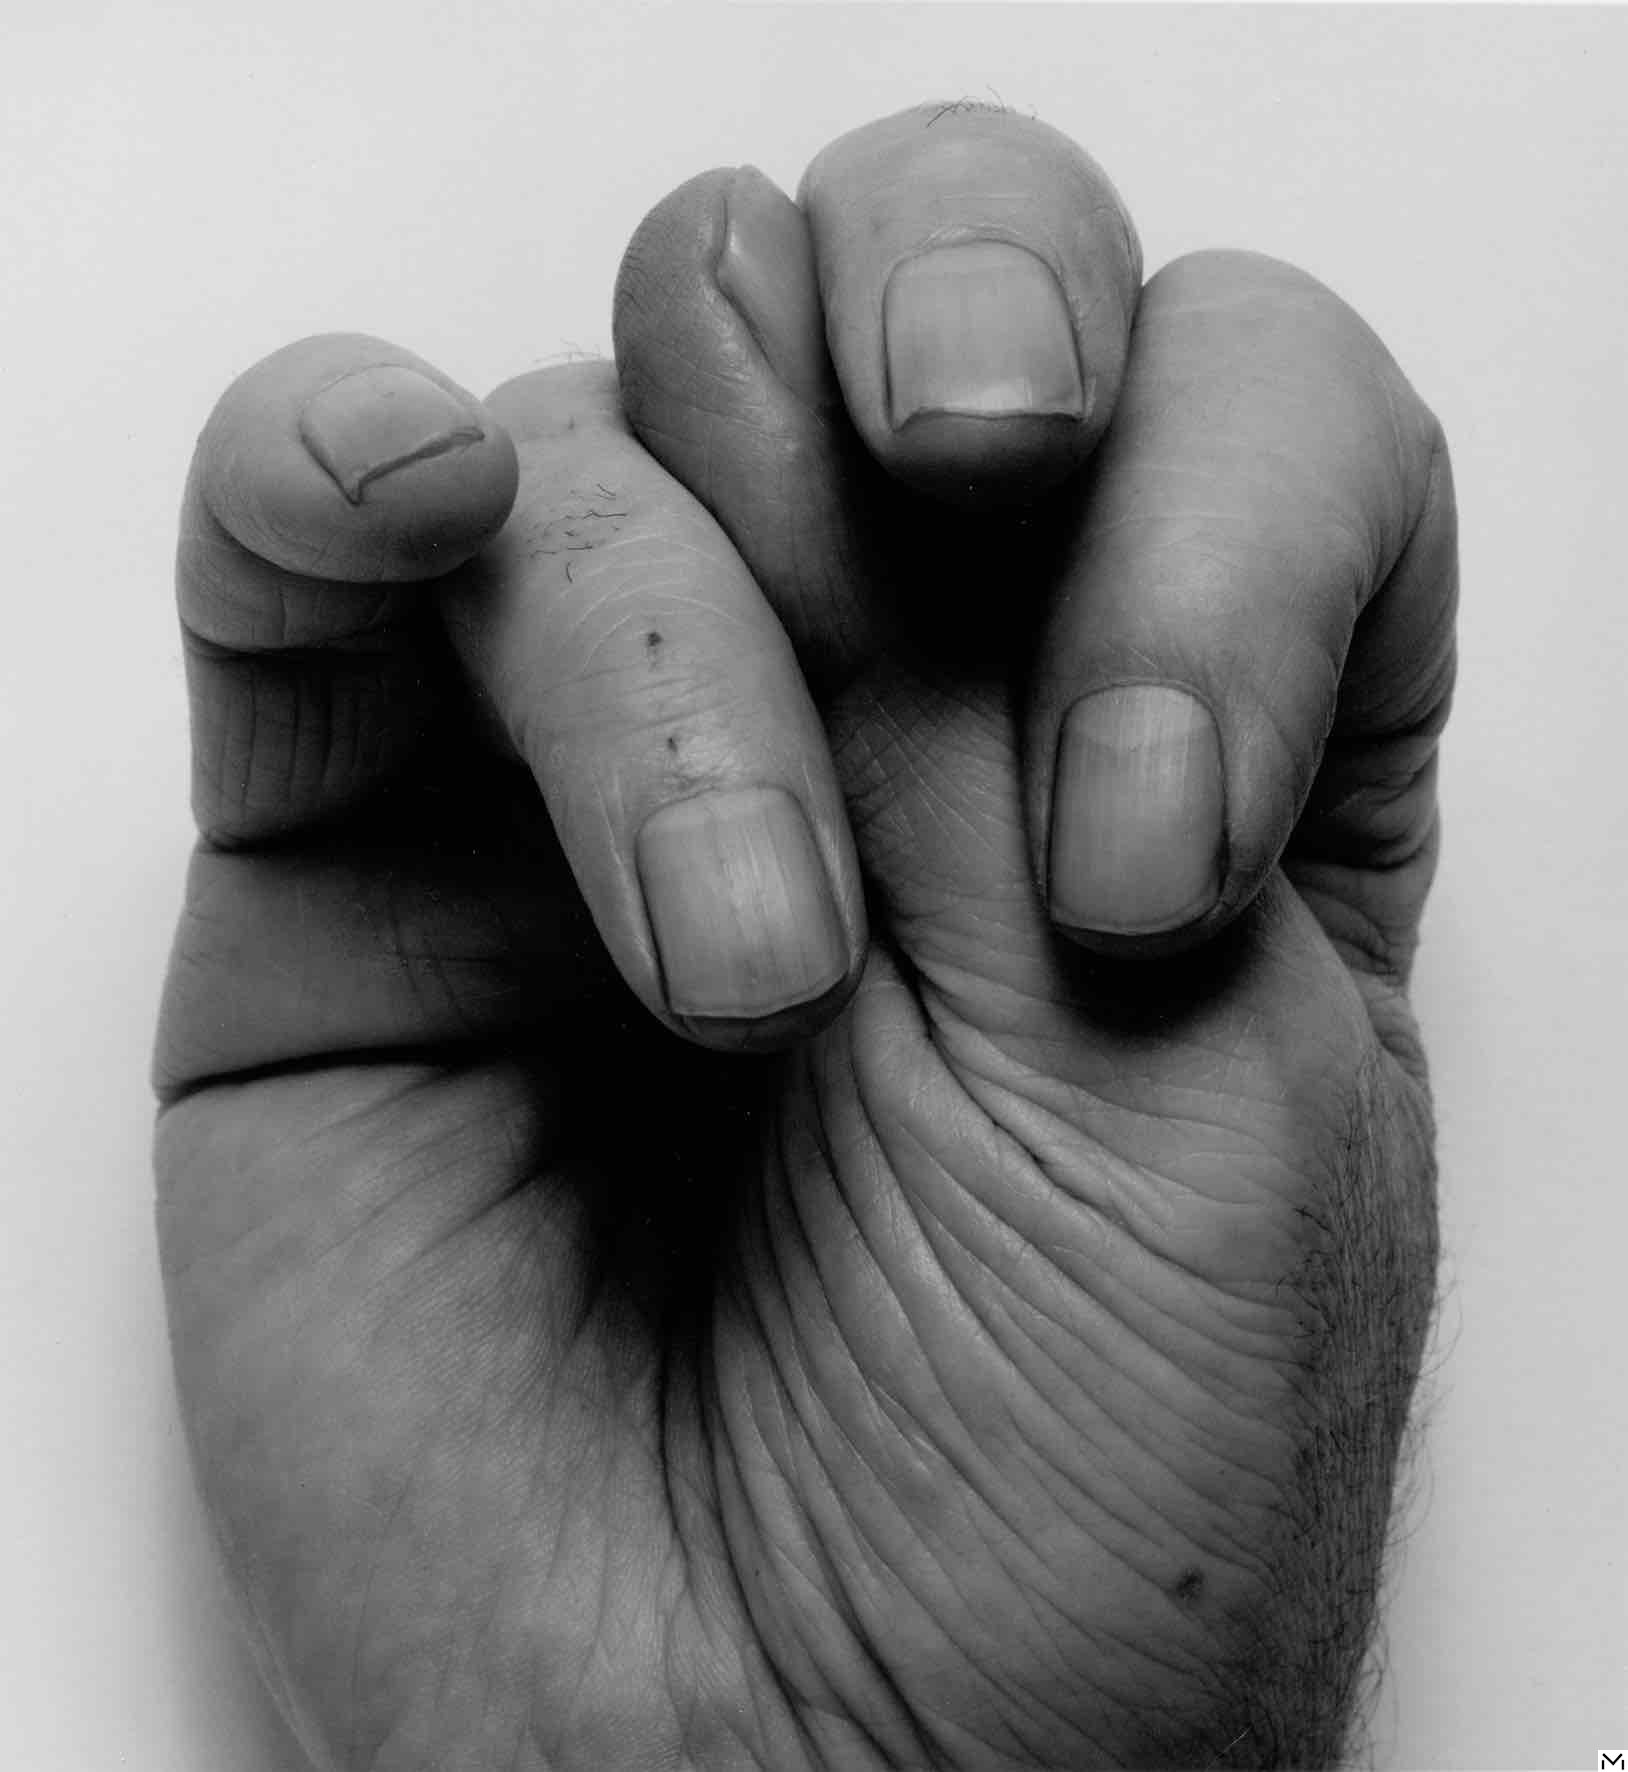 Front Hand, Thumb Up, Middle 1998©The John Coplans Trust